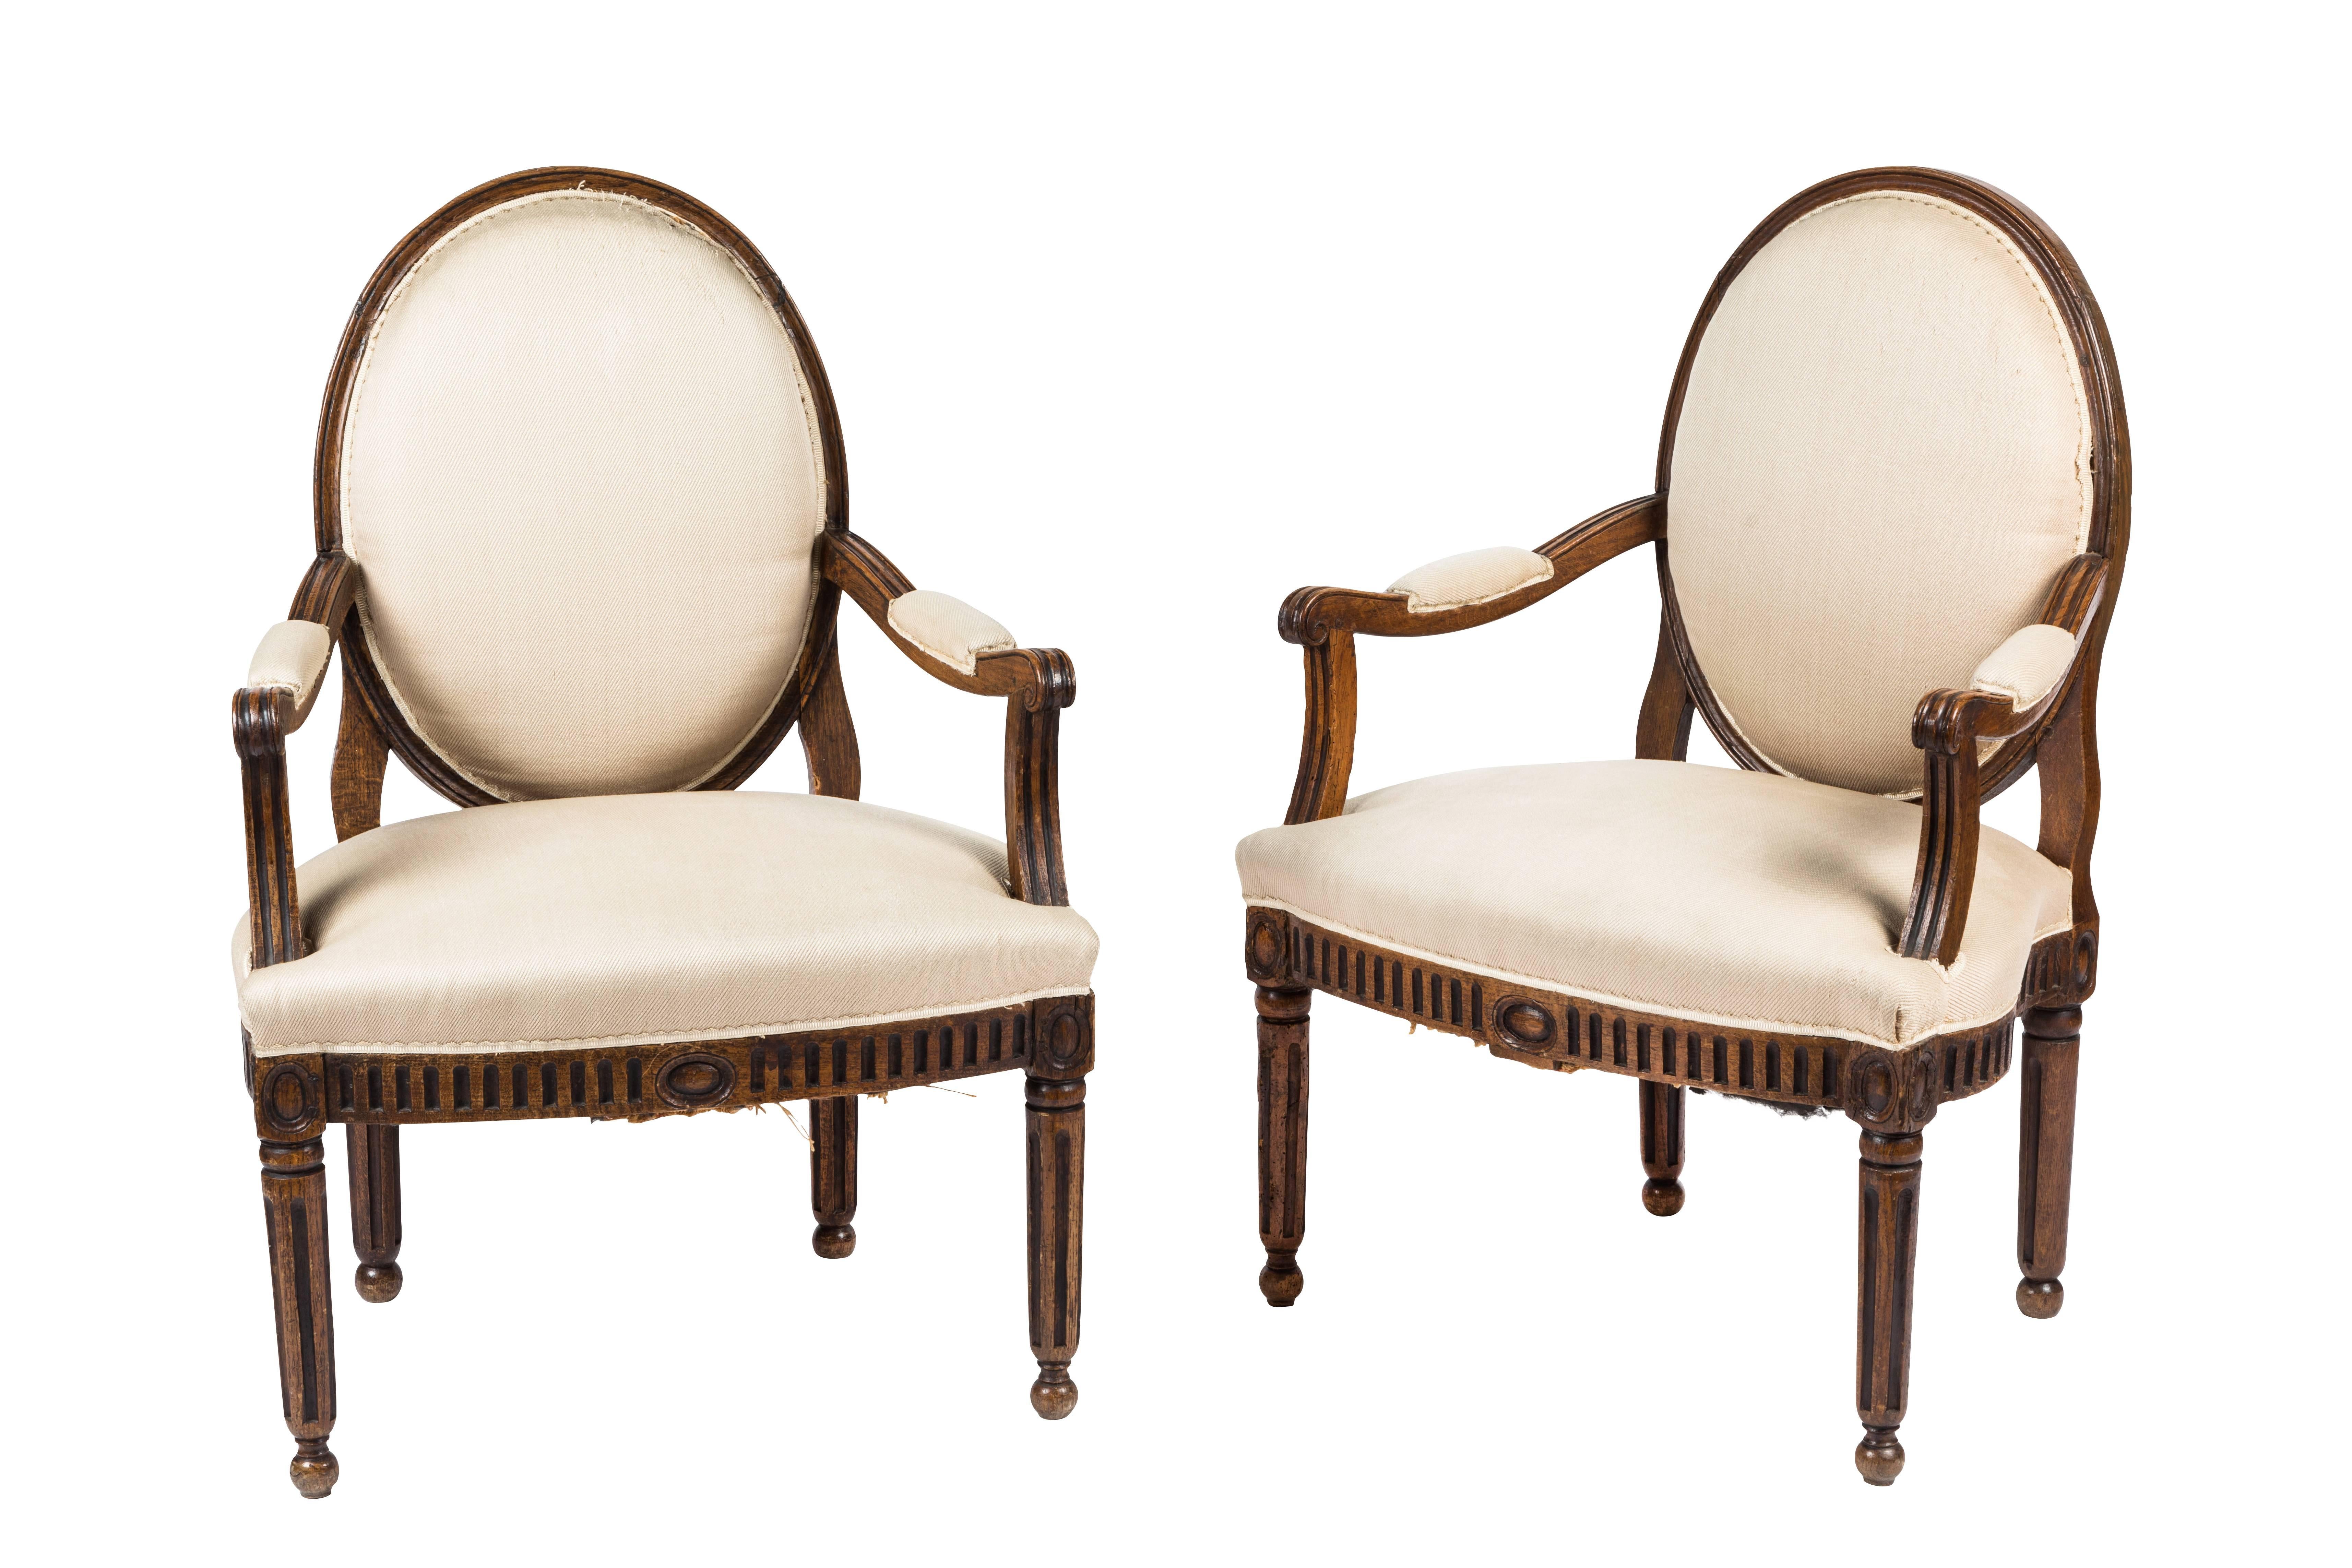 Pair of Antique Italian Neoclassical Style Armchairs In Fair Condition For Sale In LOS ANGELES, CA